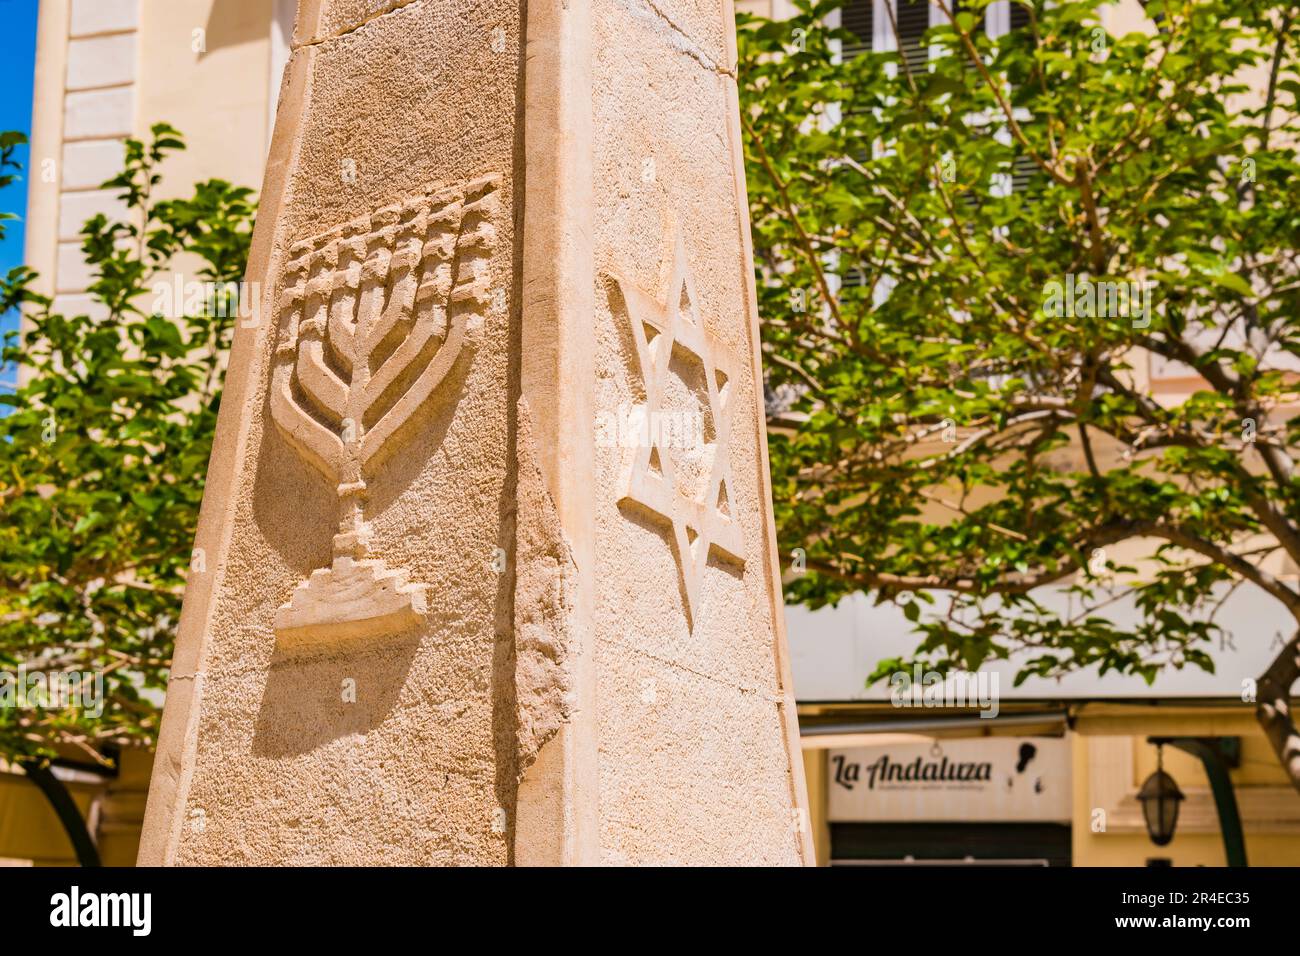 In 1977, the monolith was erected in honor of Yamin A. Benarroch, an illustrious representative of the Jewish Community in the square of the same name Stock Photo